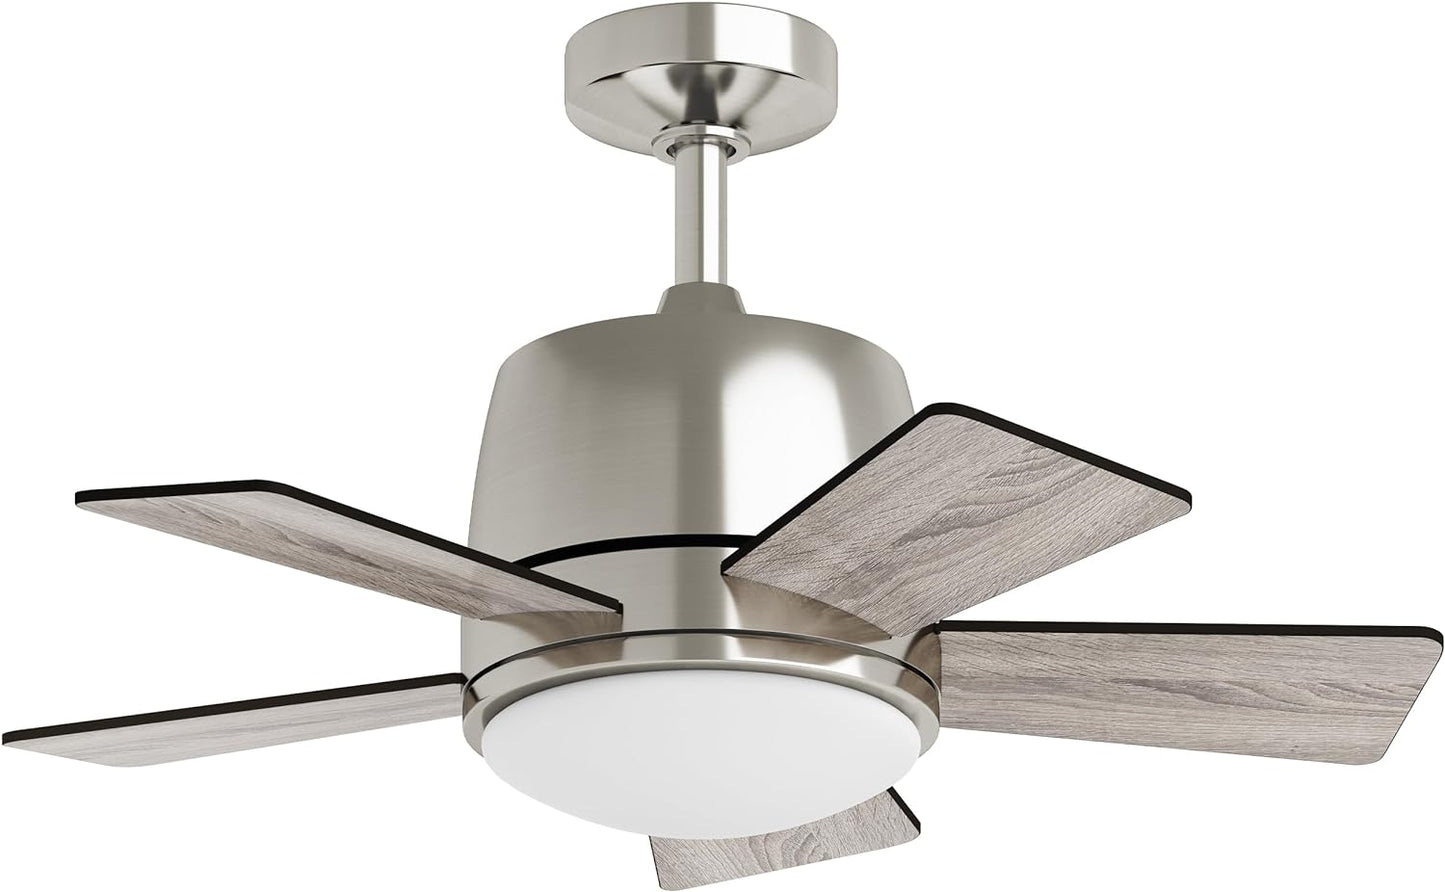 Inlight 30" Integrated LED Indoor Brushed Steel AC Motor Ceiling Fan with Light and Remote, Five Reversible Blades in a Black and Barnwood Finishes, IN-0715-3-MD